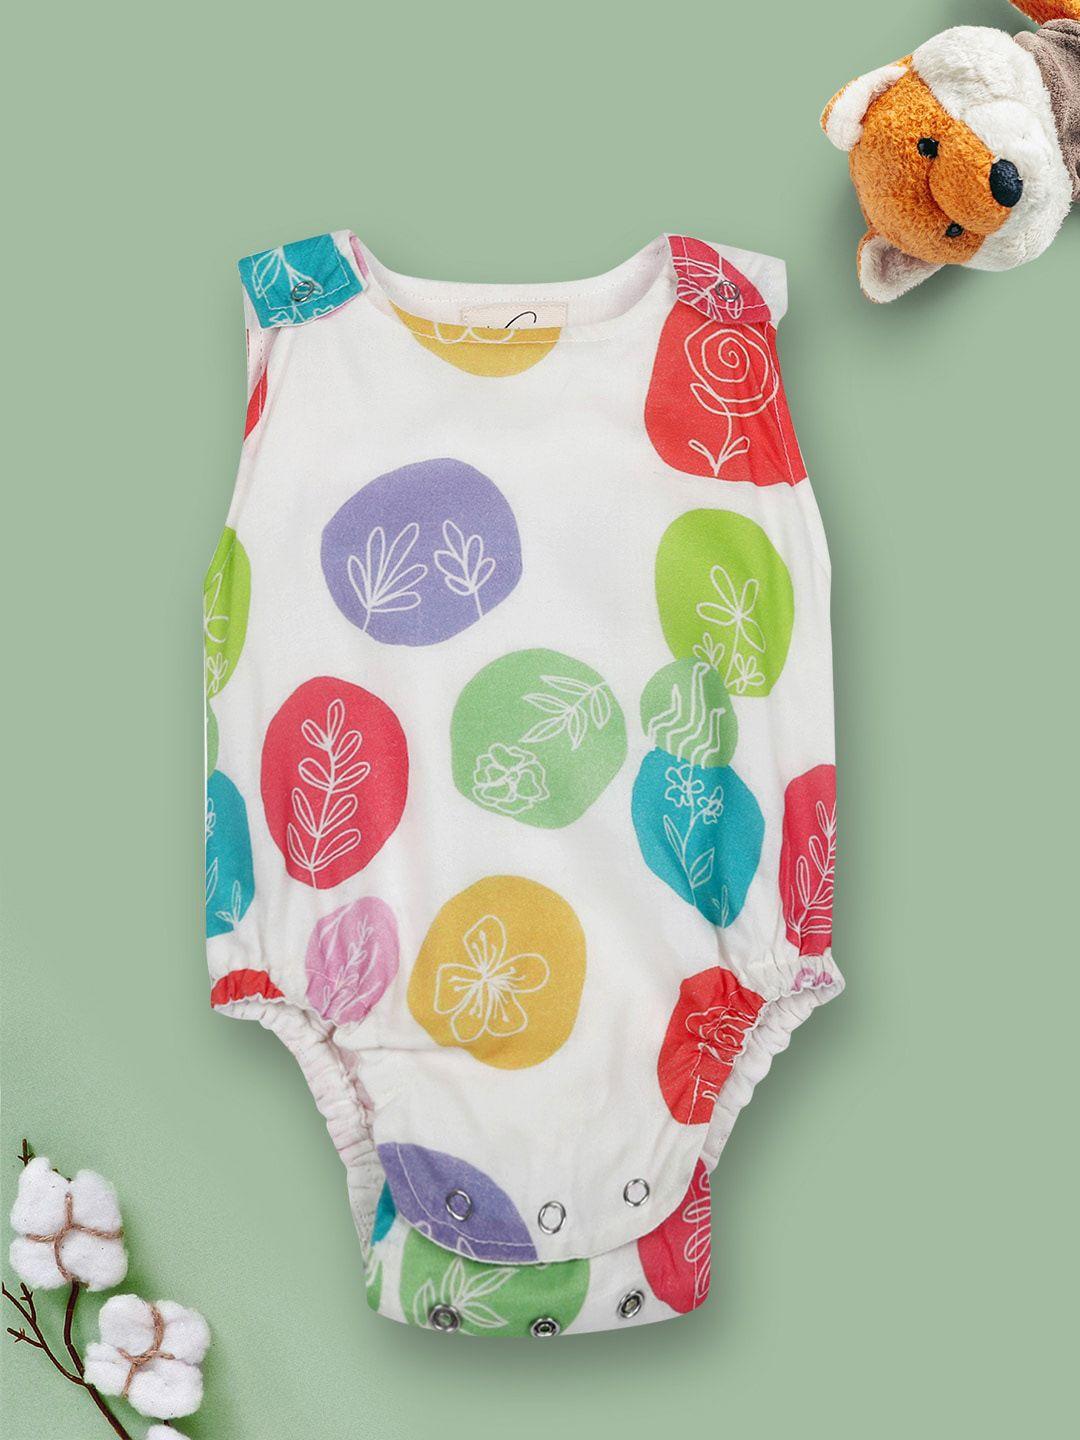 Vastrarth Infants White & Red Printed Rompers